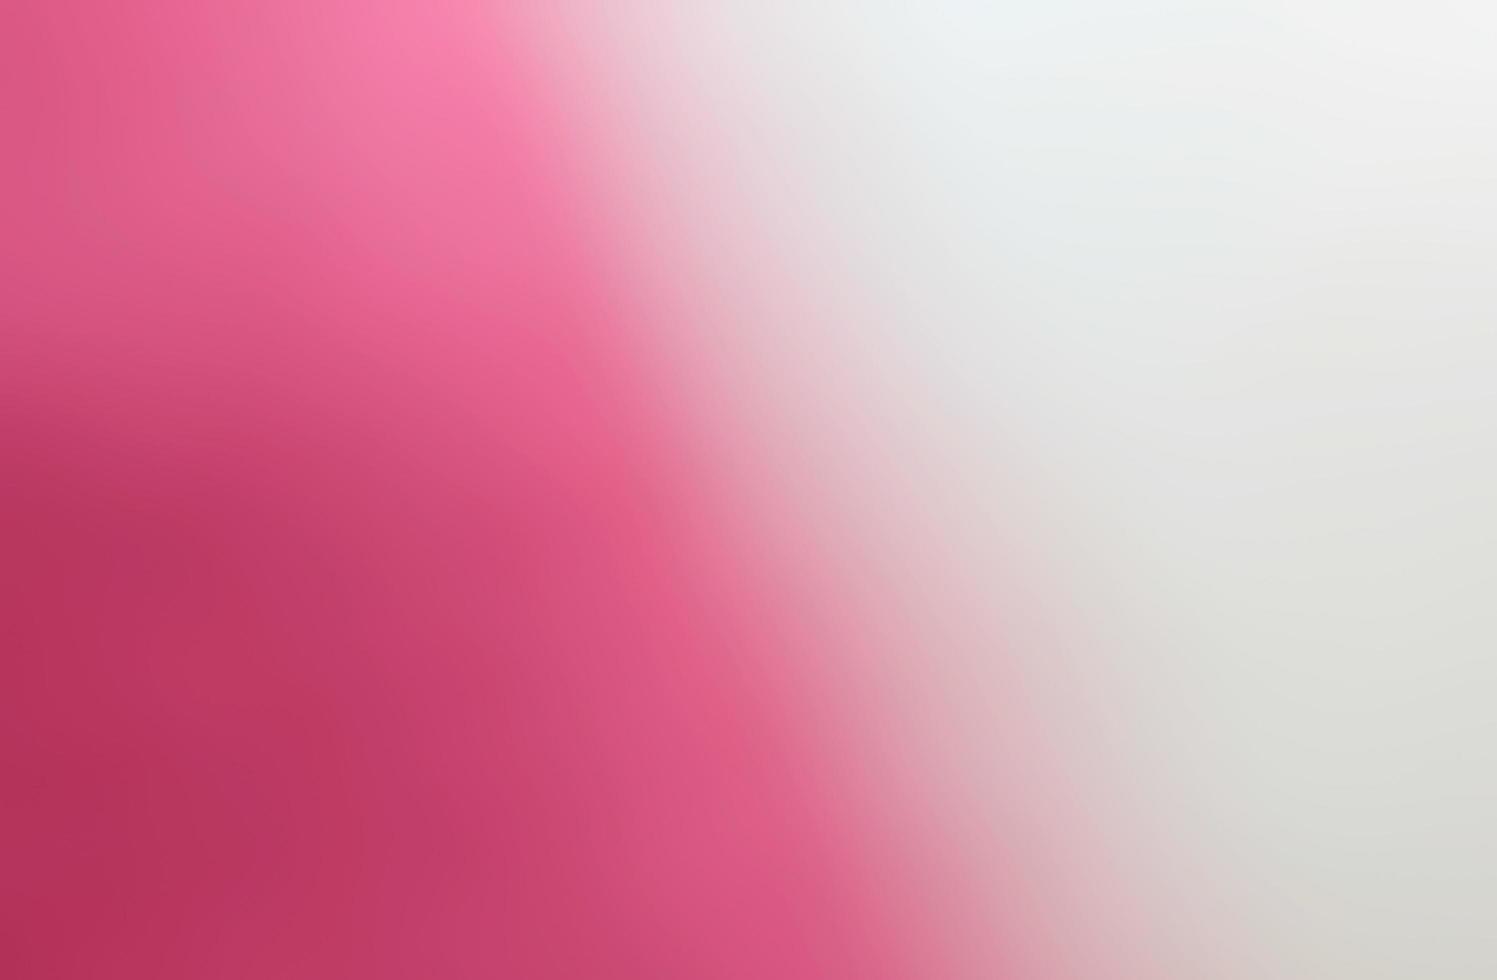 pink gradient abstract background  Use it as a banner design template for your ads, websites, platforms. photo